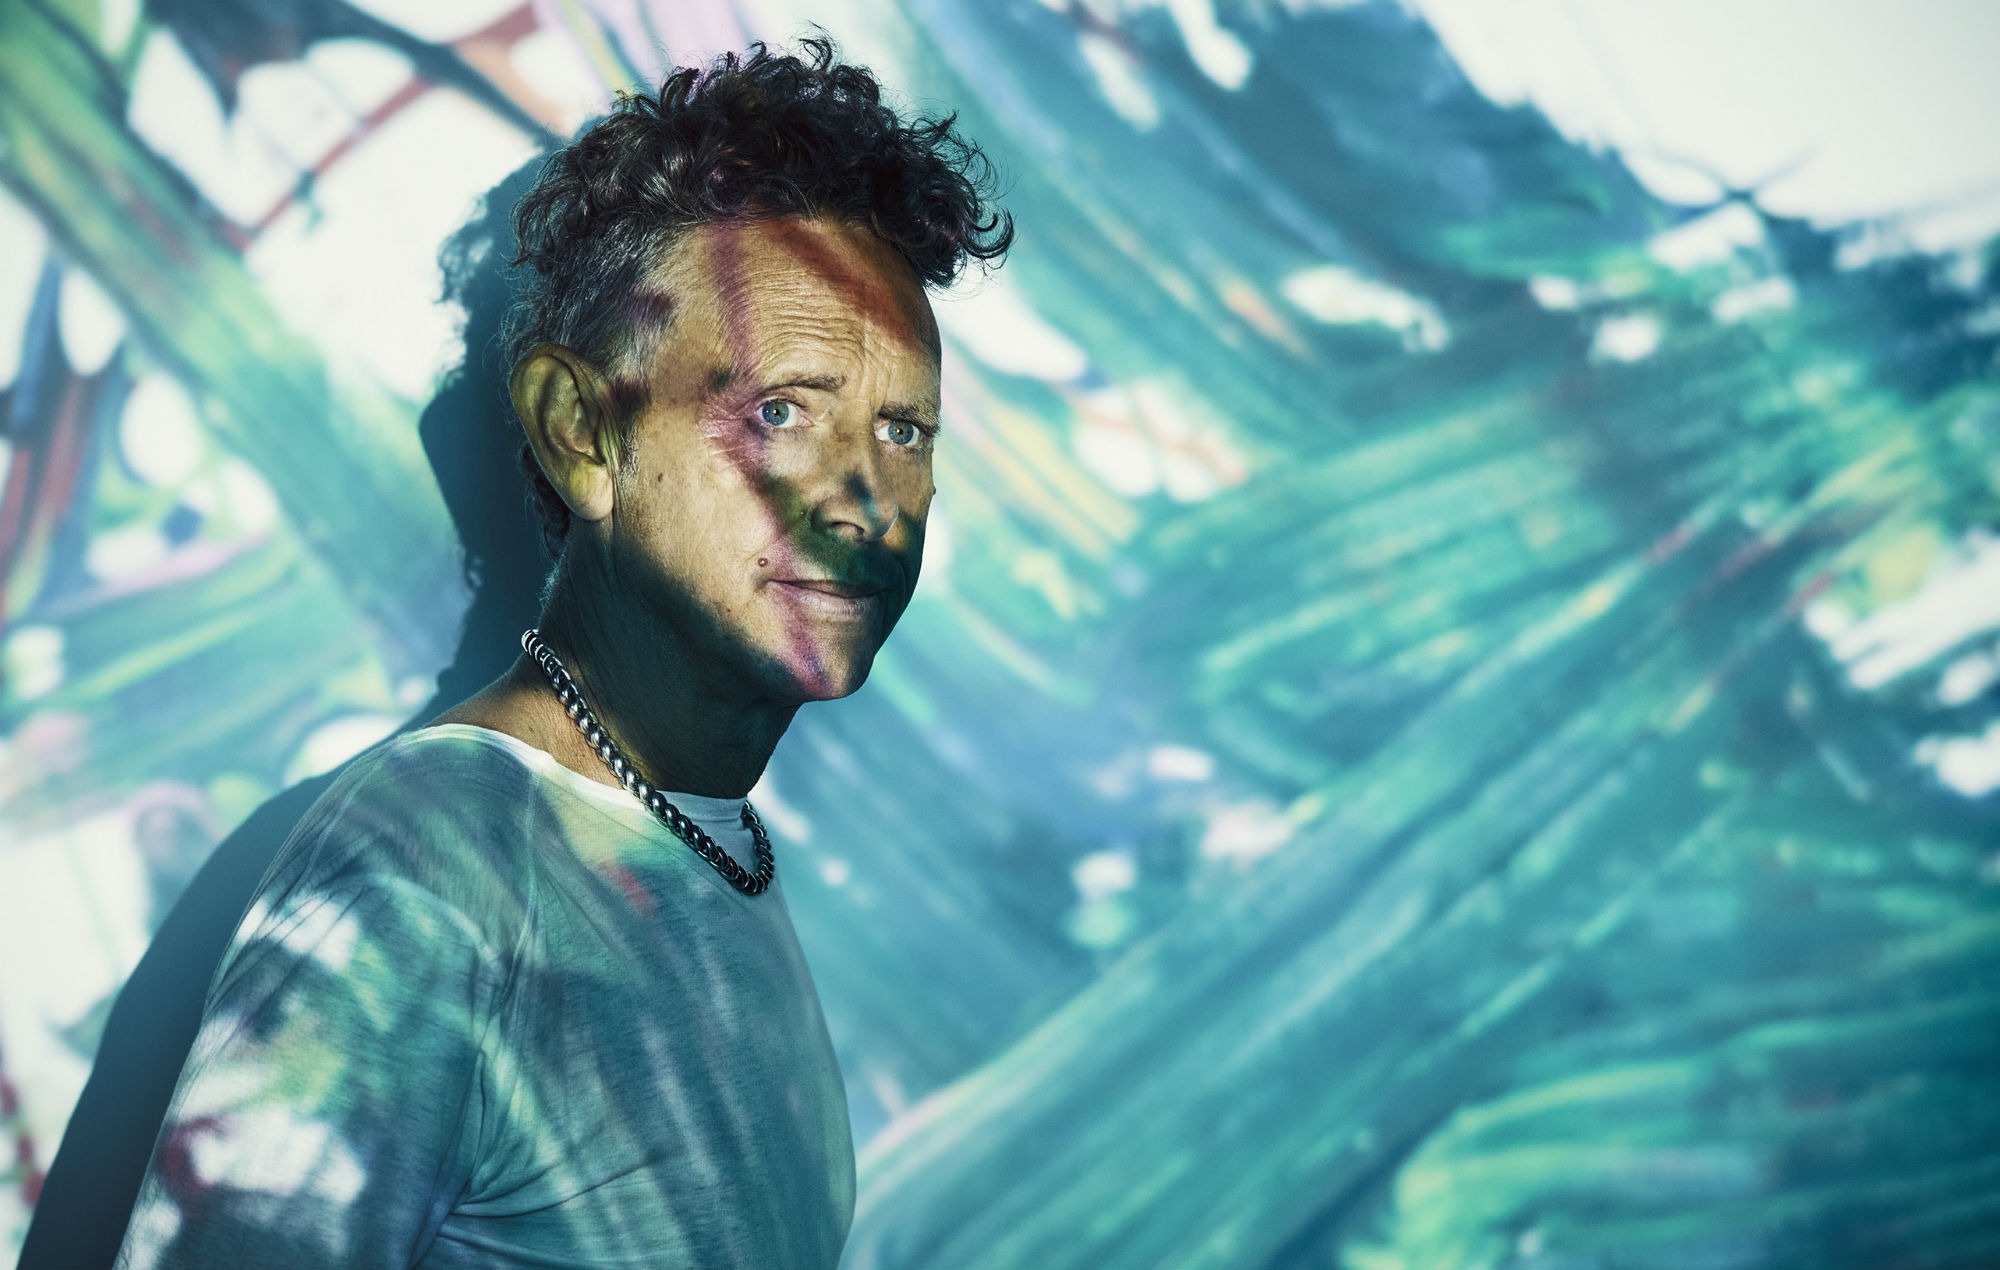 Depeche Mode’s Martin Gore shares ‘Howler’ video and tells us about his monkey-inspired EP